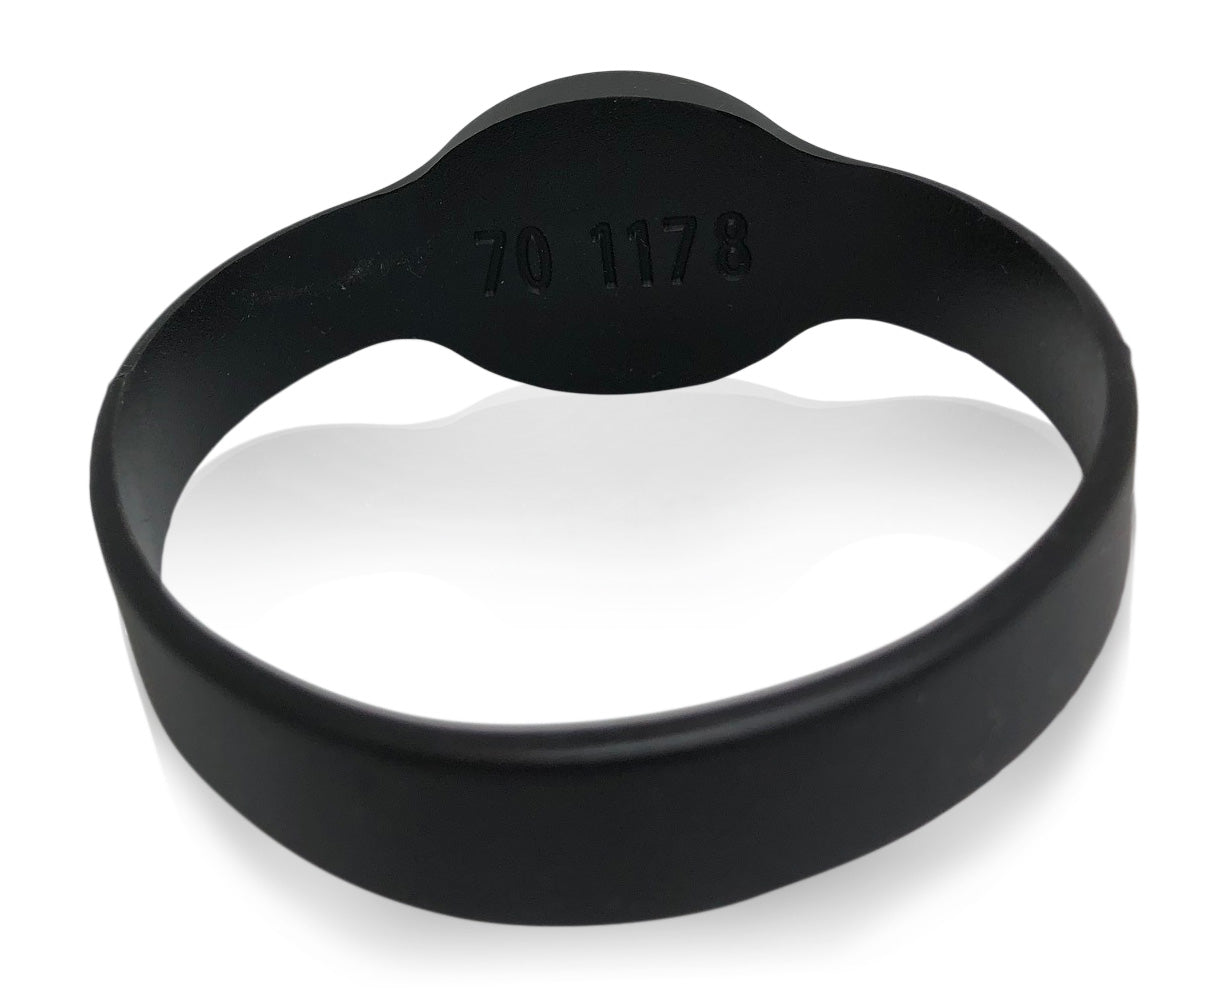 AWID 26, 34, 36, and 50 Bit Format Compatible Black Wristbands